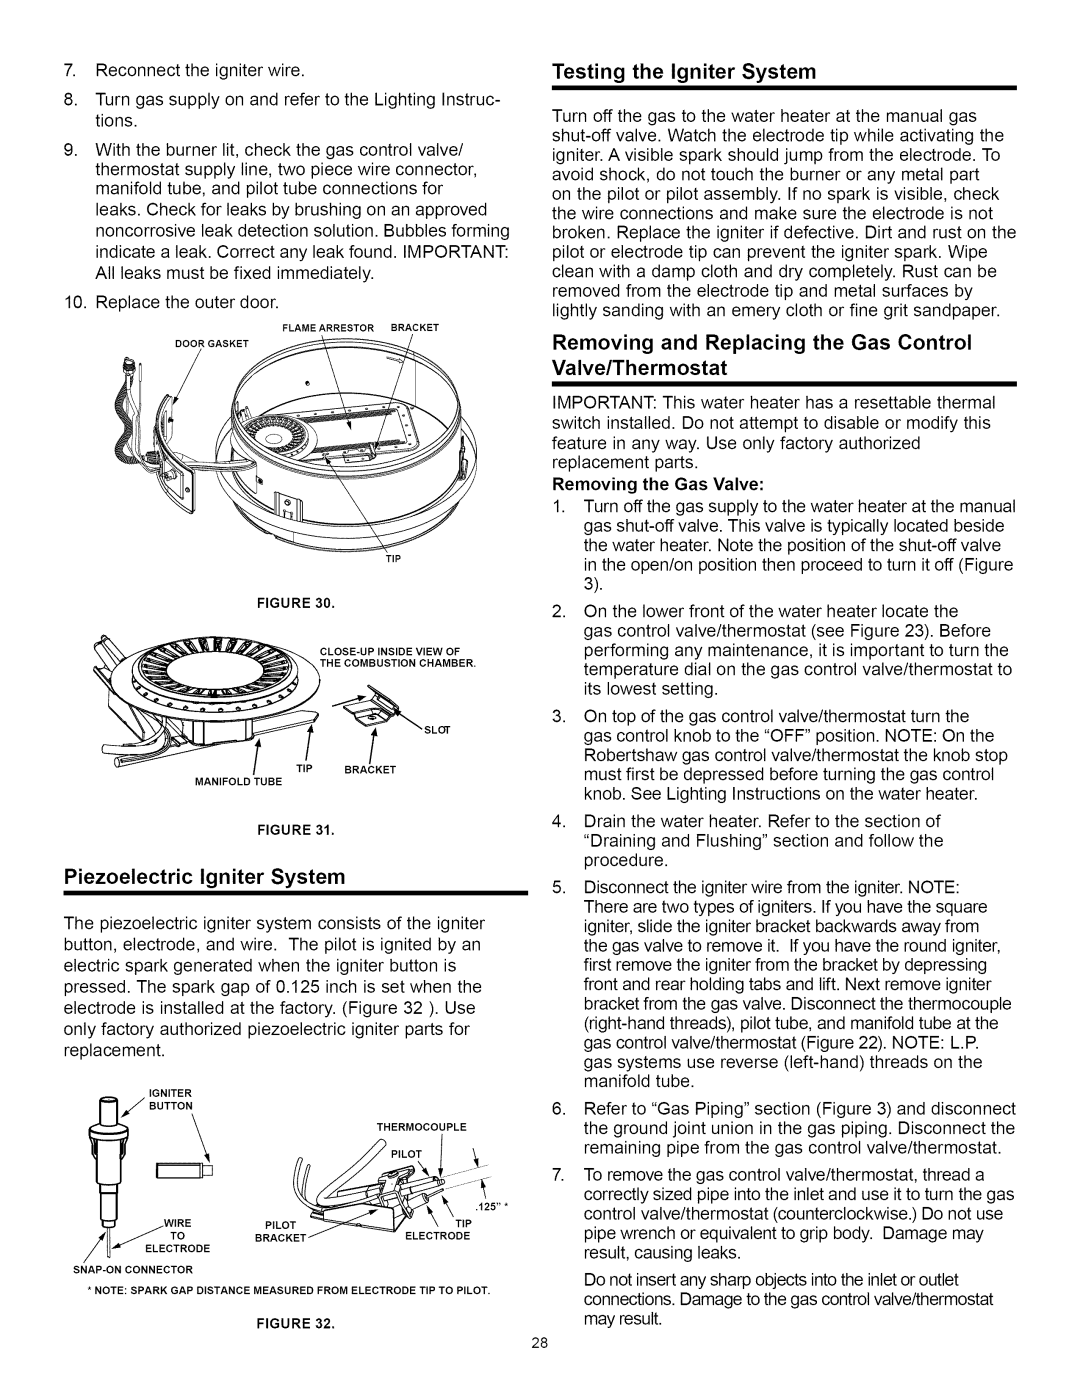 A.O. Smith Water Heater installation instructions Piezoelectric Igniter System, Testing the Igniter System, 2P,LOT 